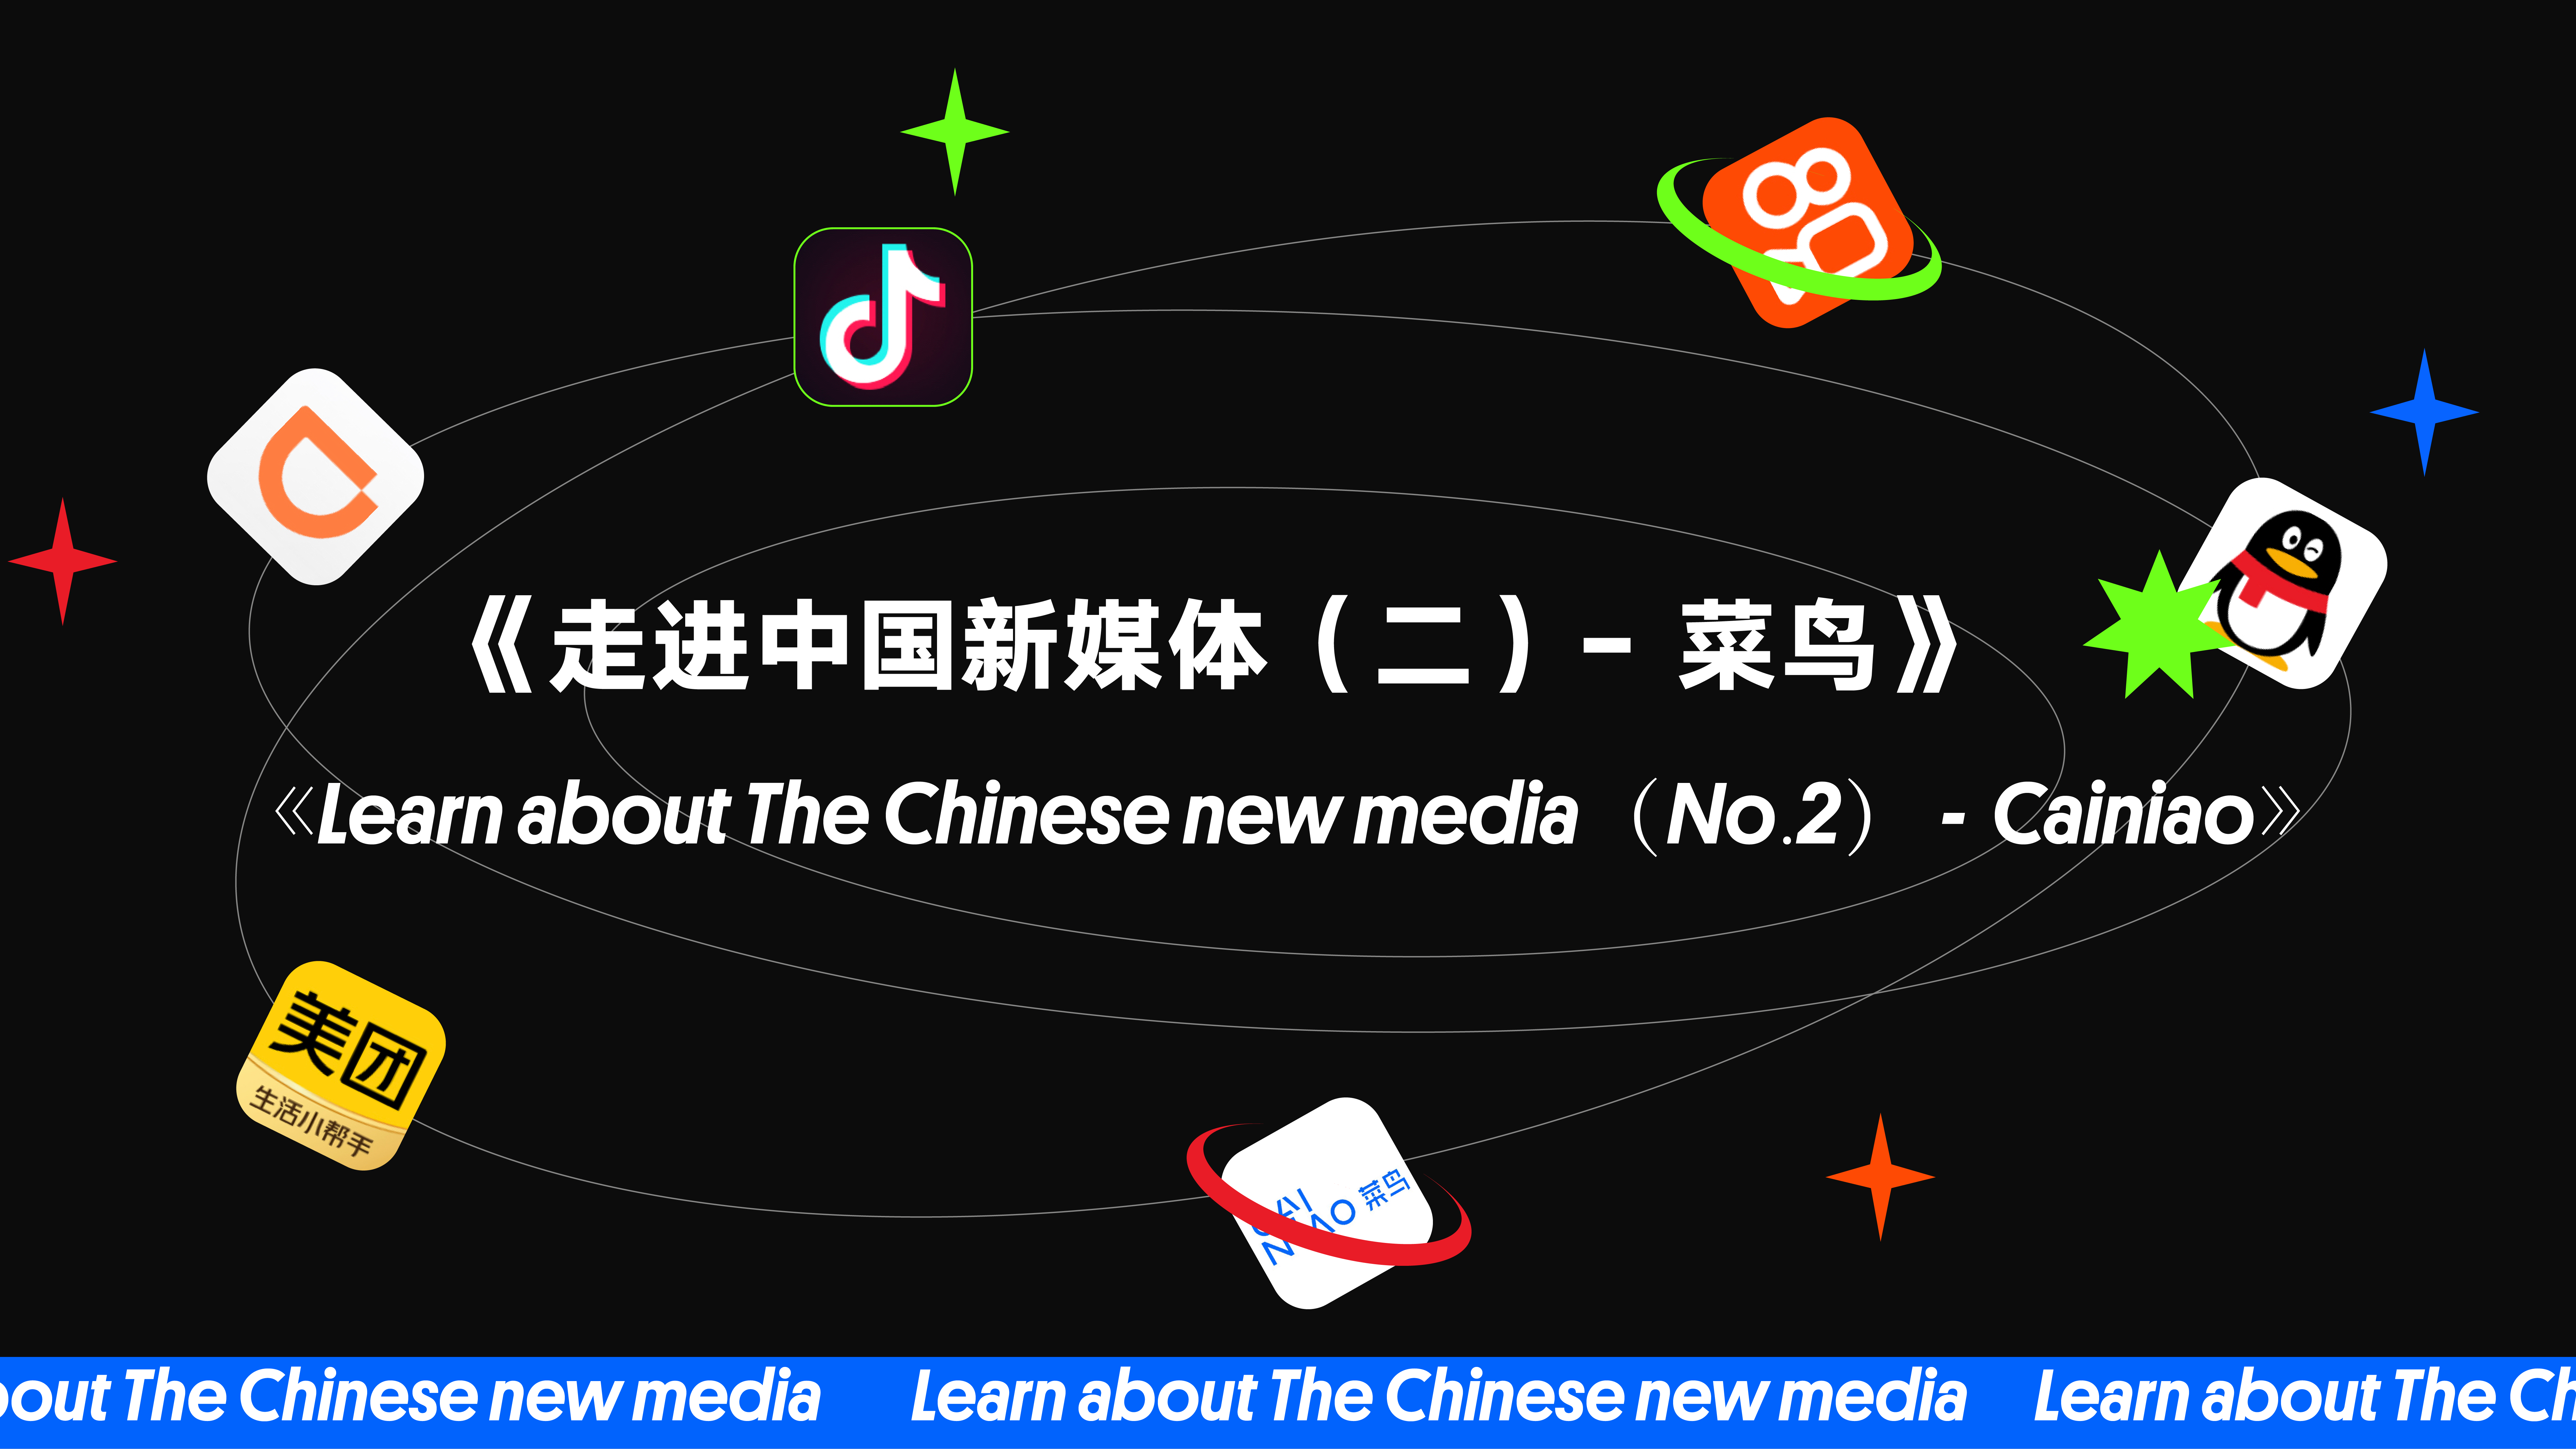 《Learn about The Chinese new media（No.2）— Cainiao》